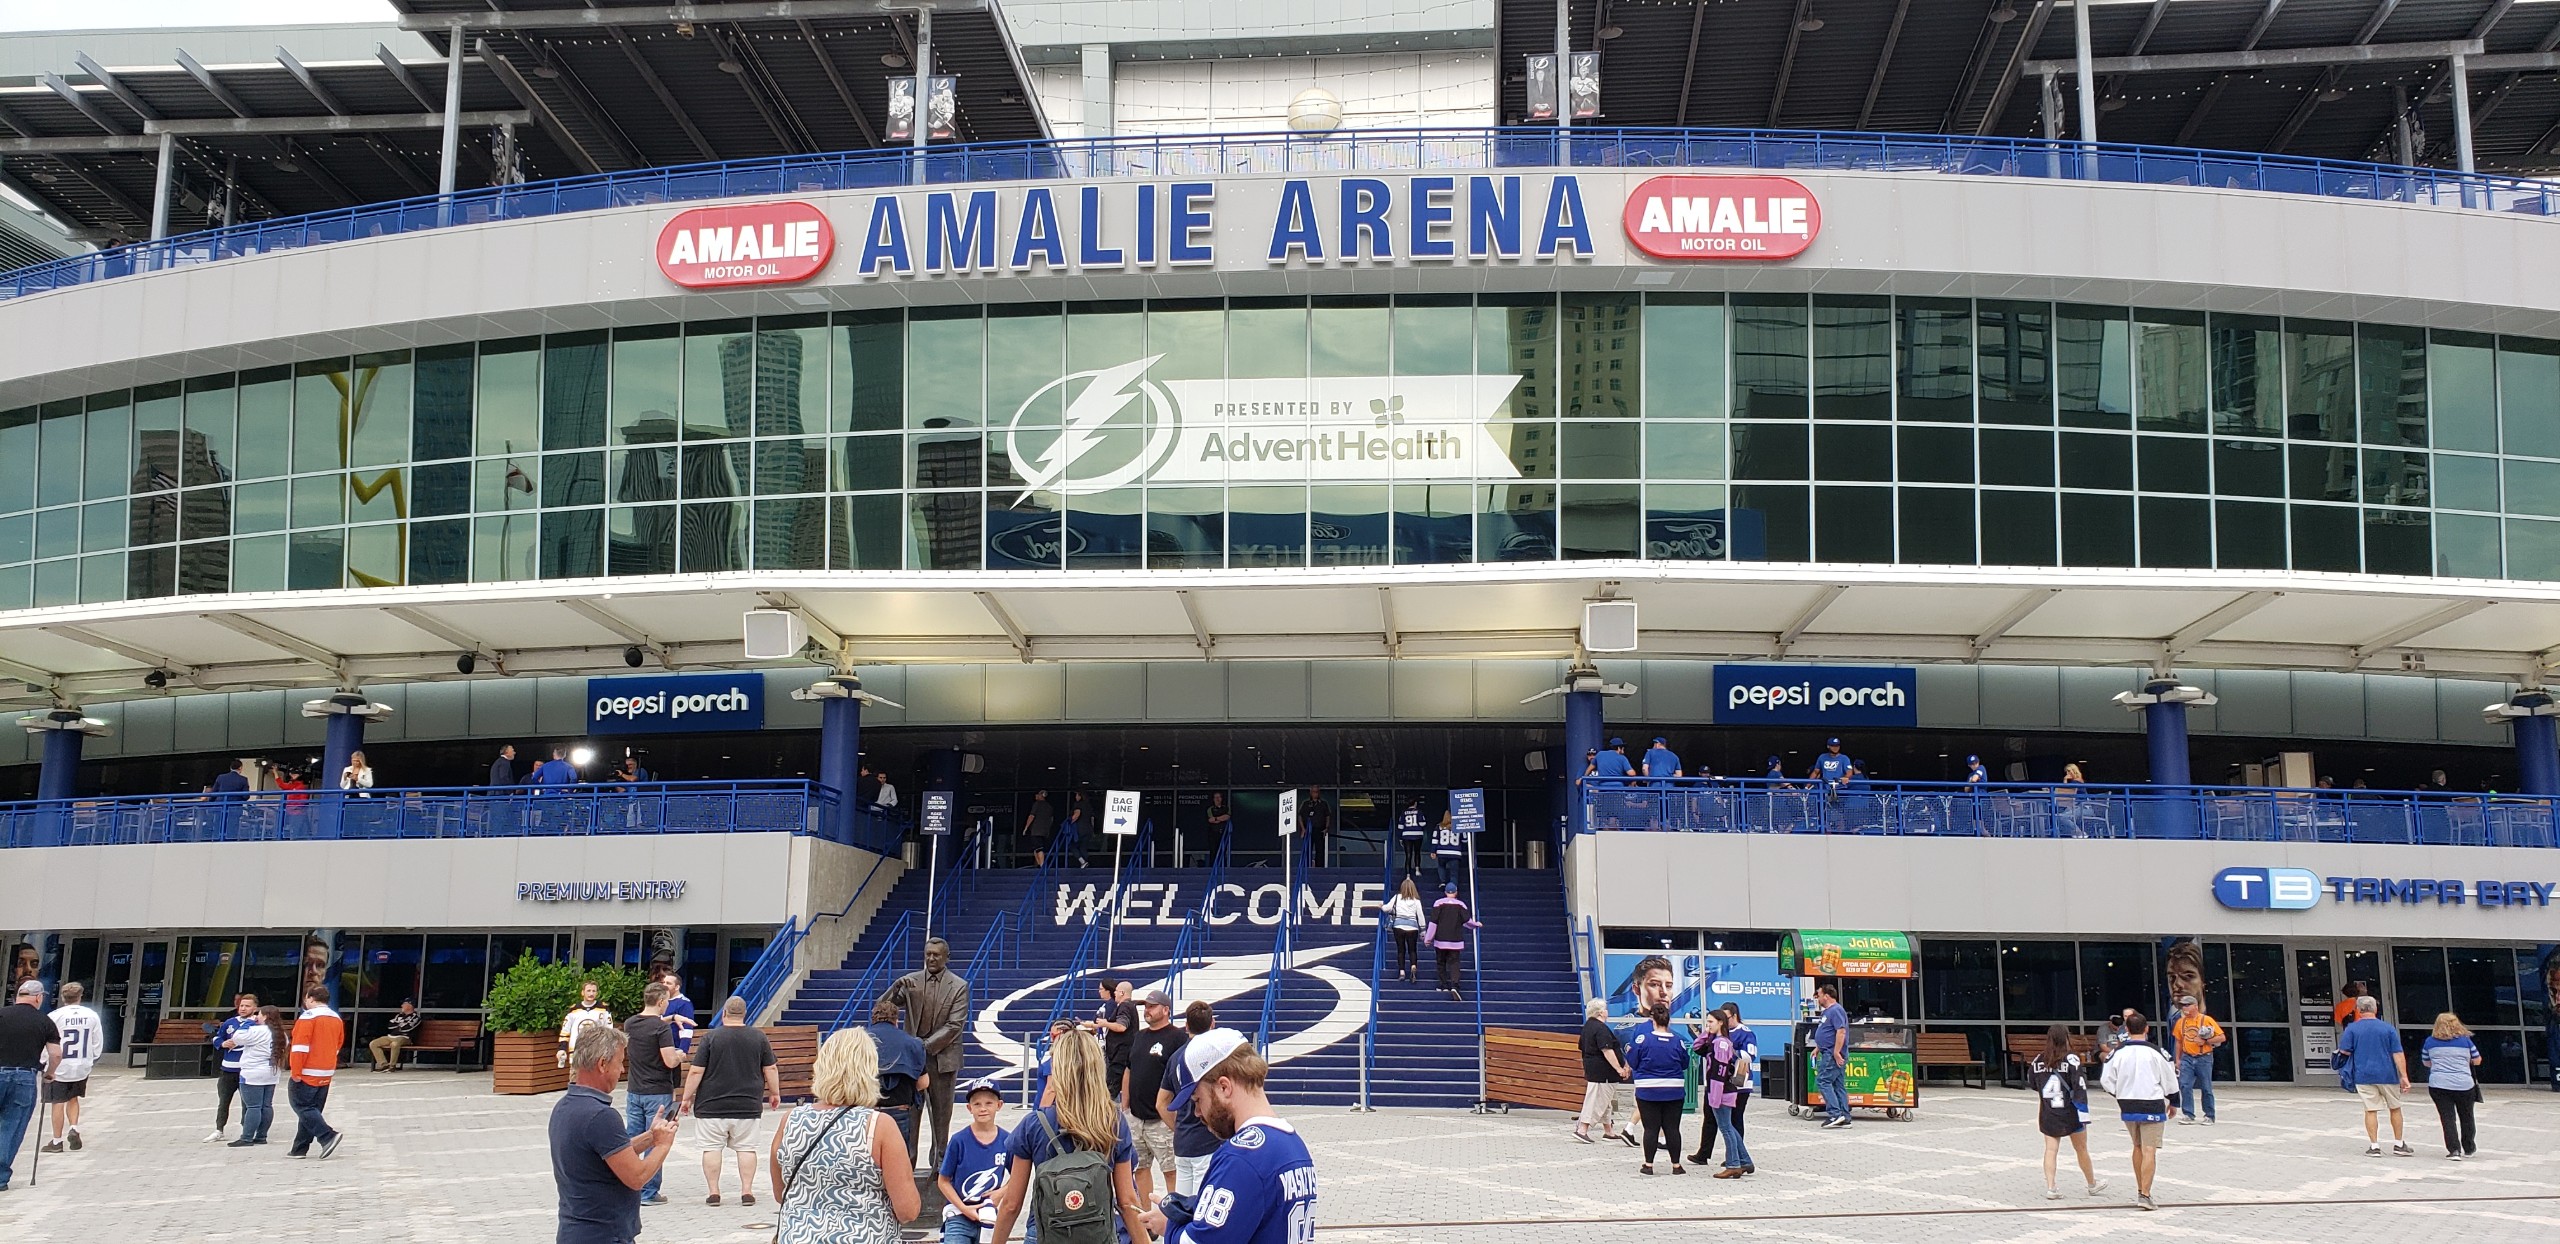 Tampa Bay Lightning on X: RT @ShopTBSports: Our Sidewalk Sale is a go!  Come see us at @AmalieArena till 6pm.  / X